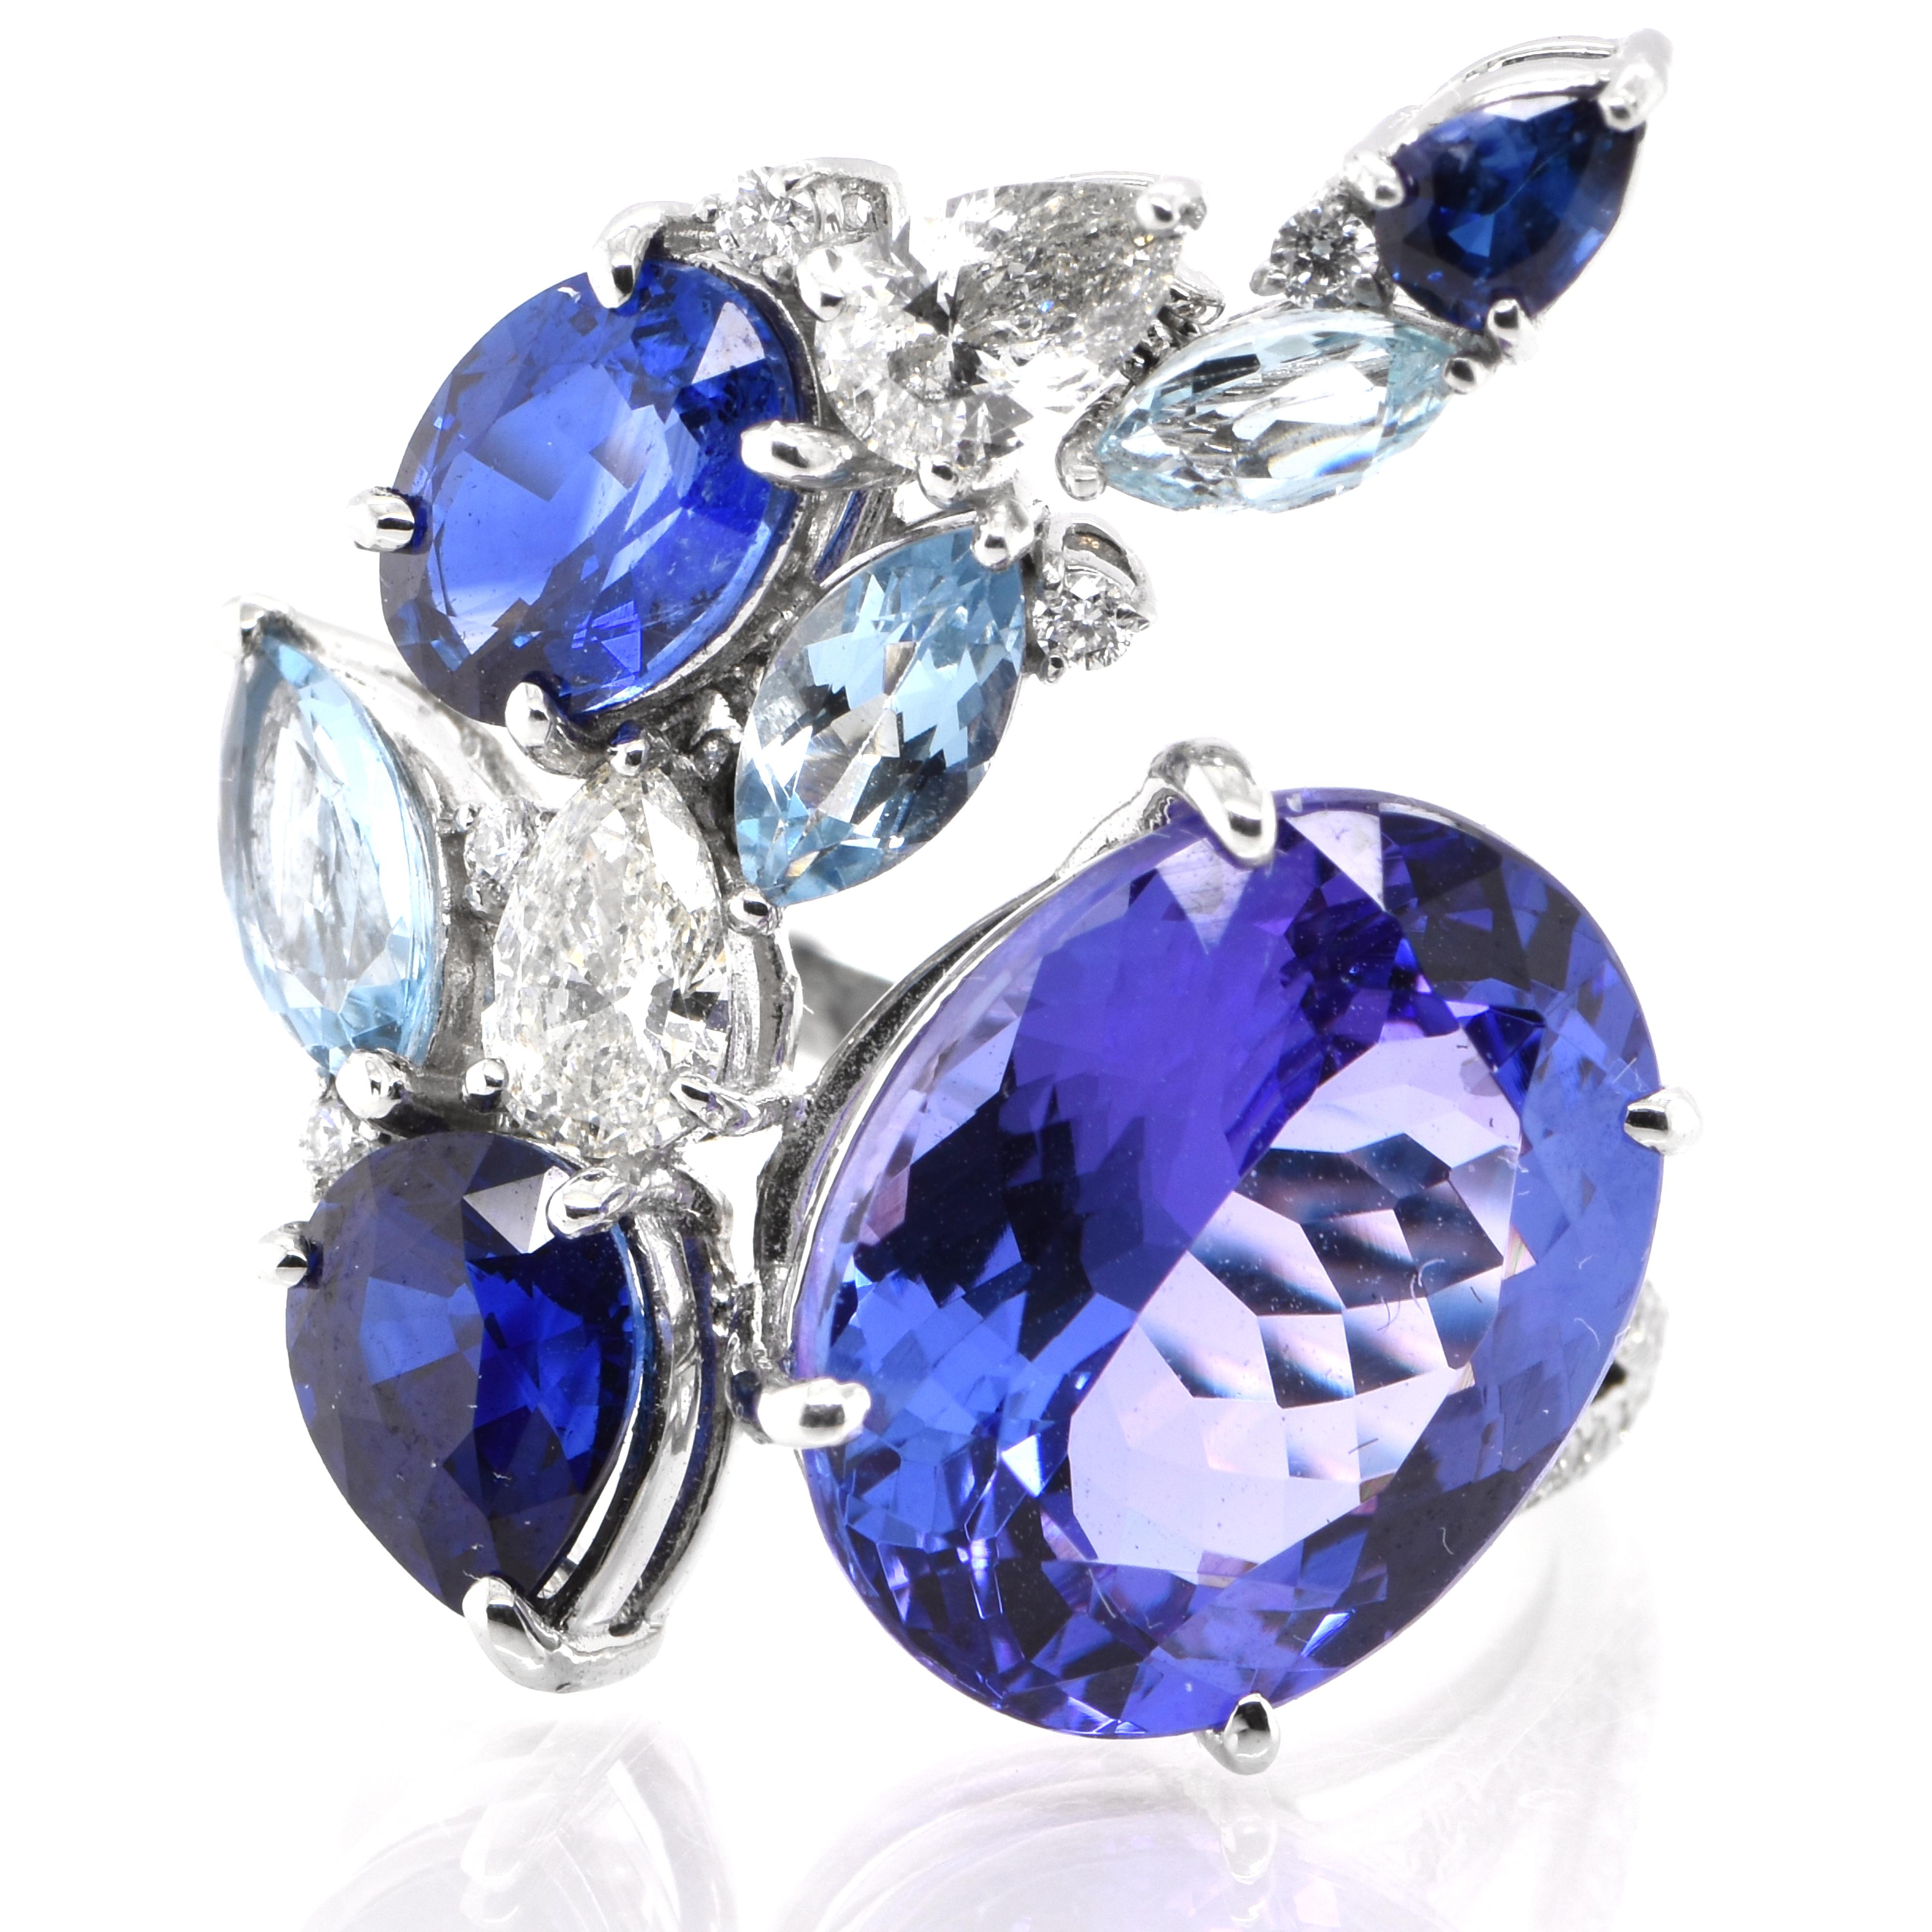 A beautiful Cocktail Ring featuring 6.31 Carat Natural Tanzanite, 2.12 Carats Natural Sapphires (Certified by AIGS), 0.62 Carats Aquamarine and 0.62 Carats of Diamond set in Platinum. Tanzanite's name was given by Tiffany and Co after its only known